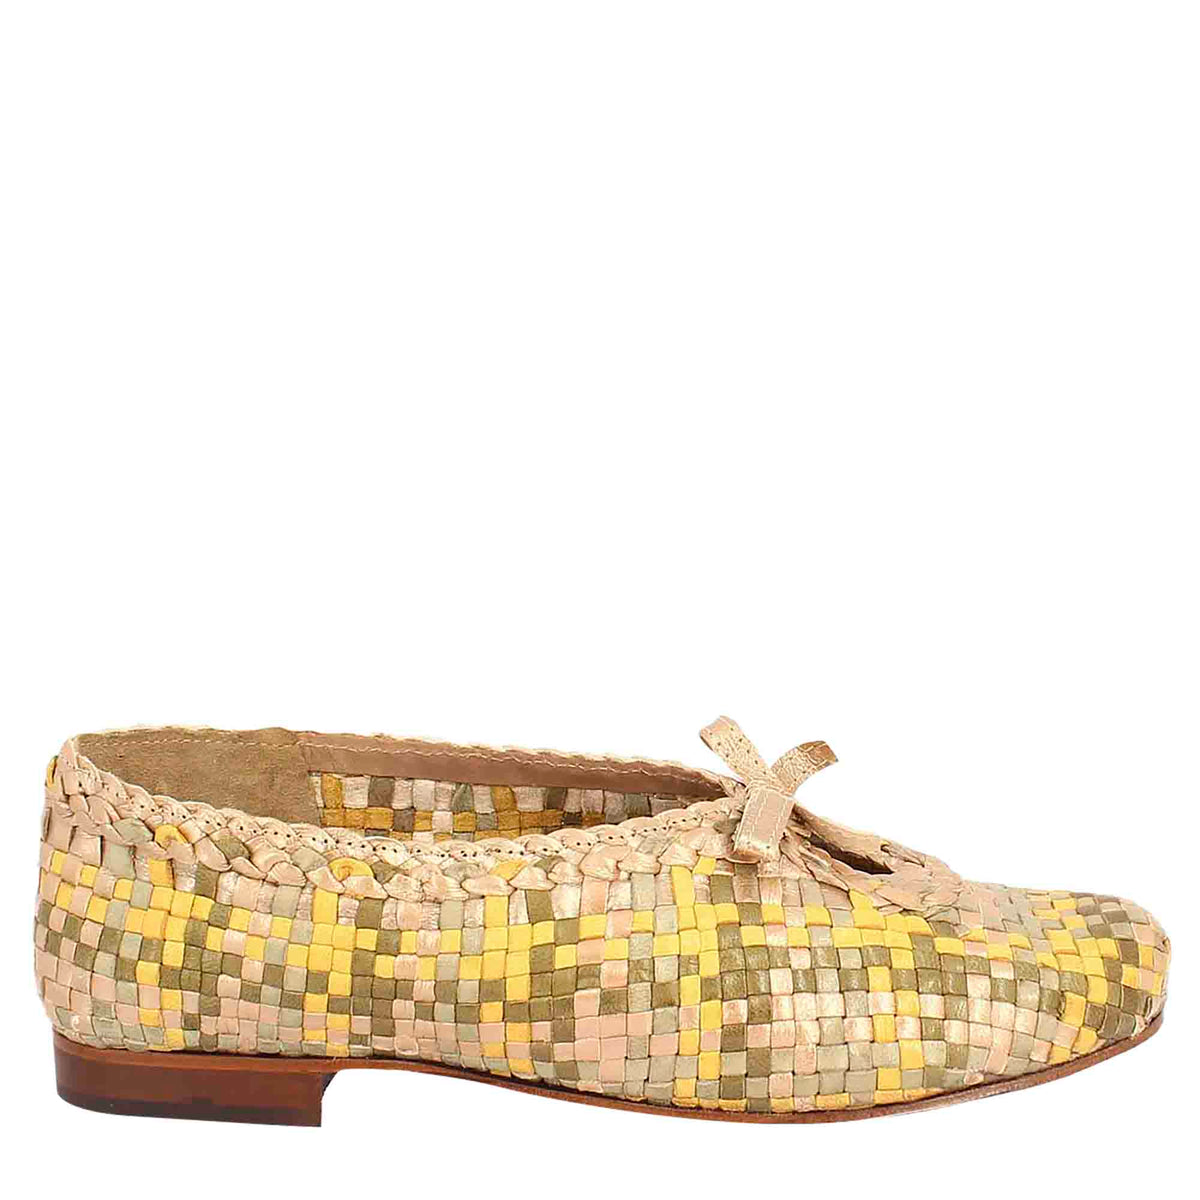 Women's handmade slip-on loafers in beige green and yellow woven leather